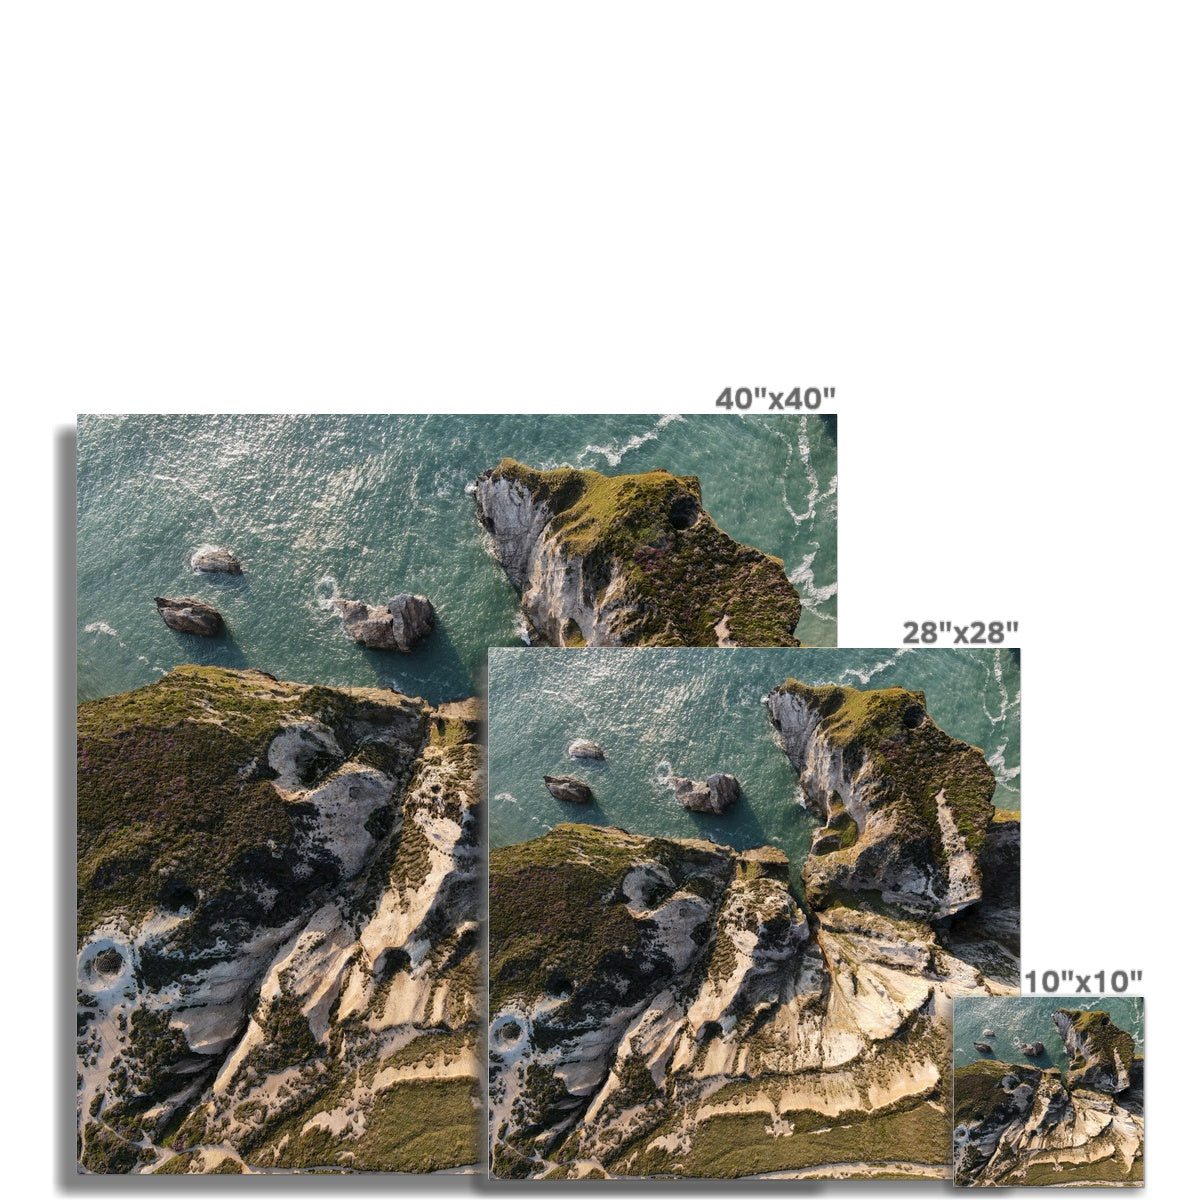 hanover cove top down picture sizes